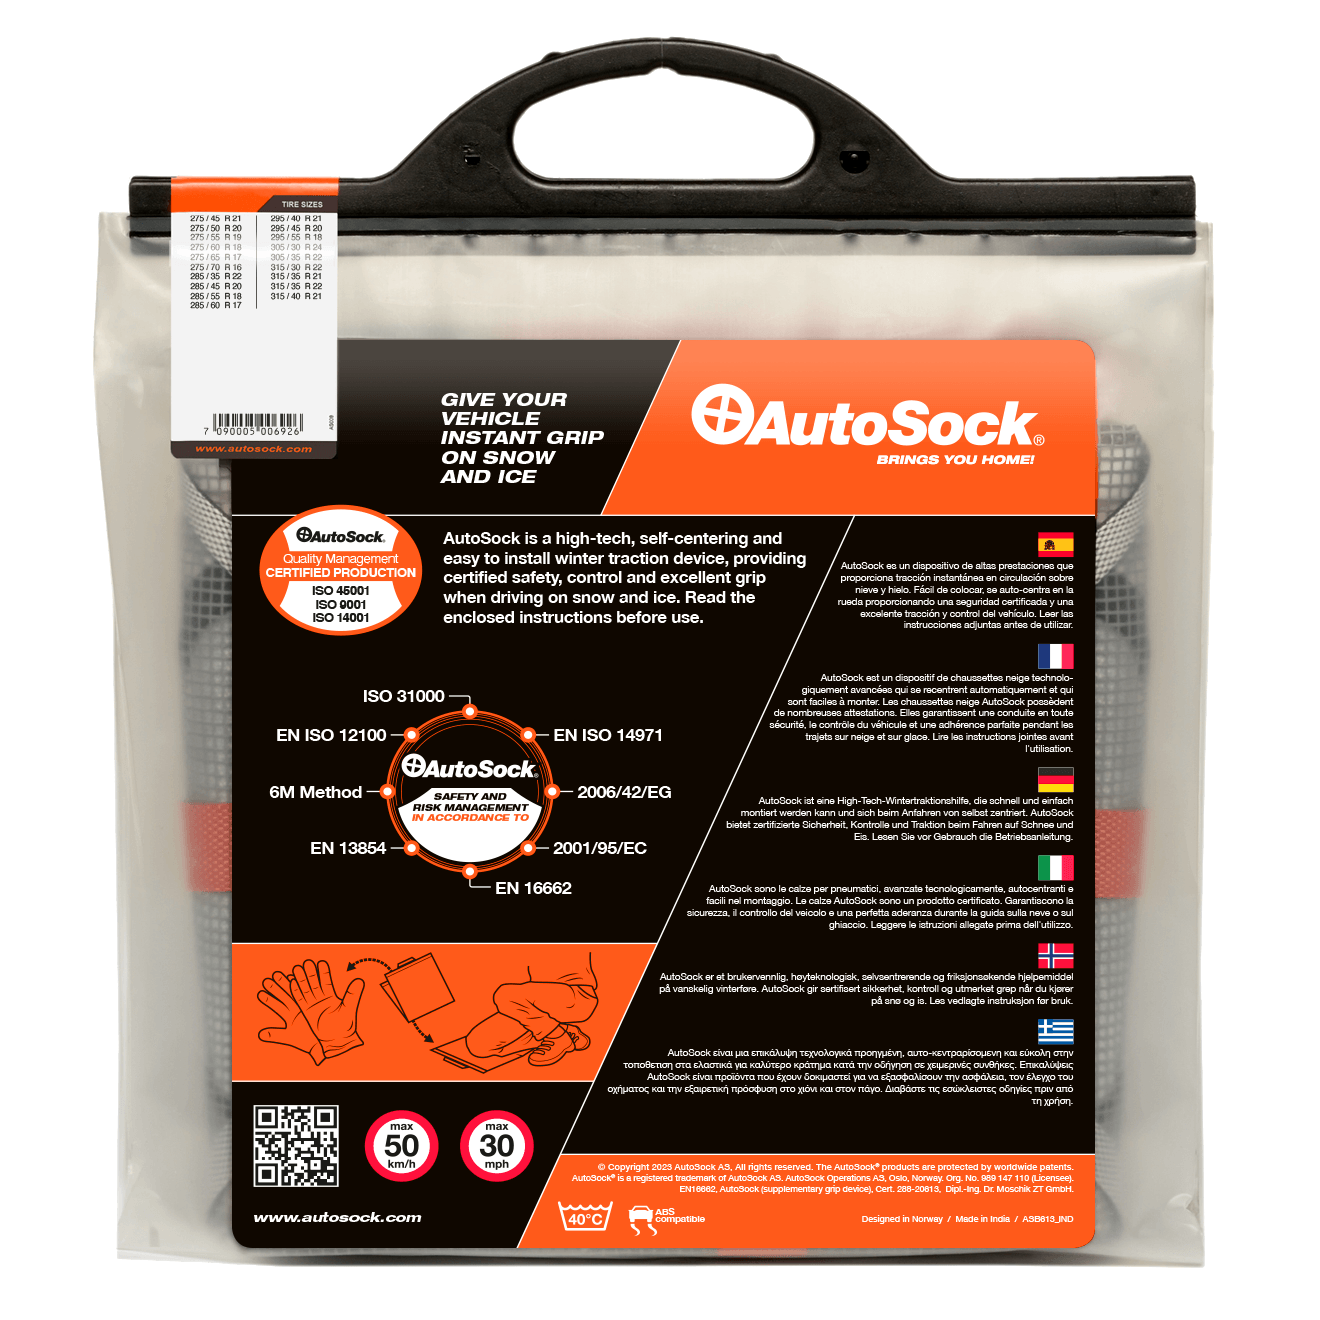 Back side of product packaging for AutoSock HP 860 HP860